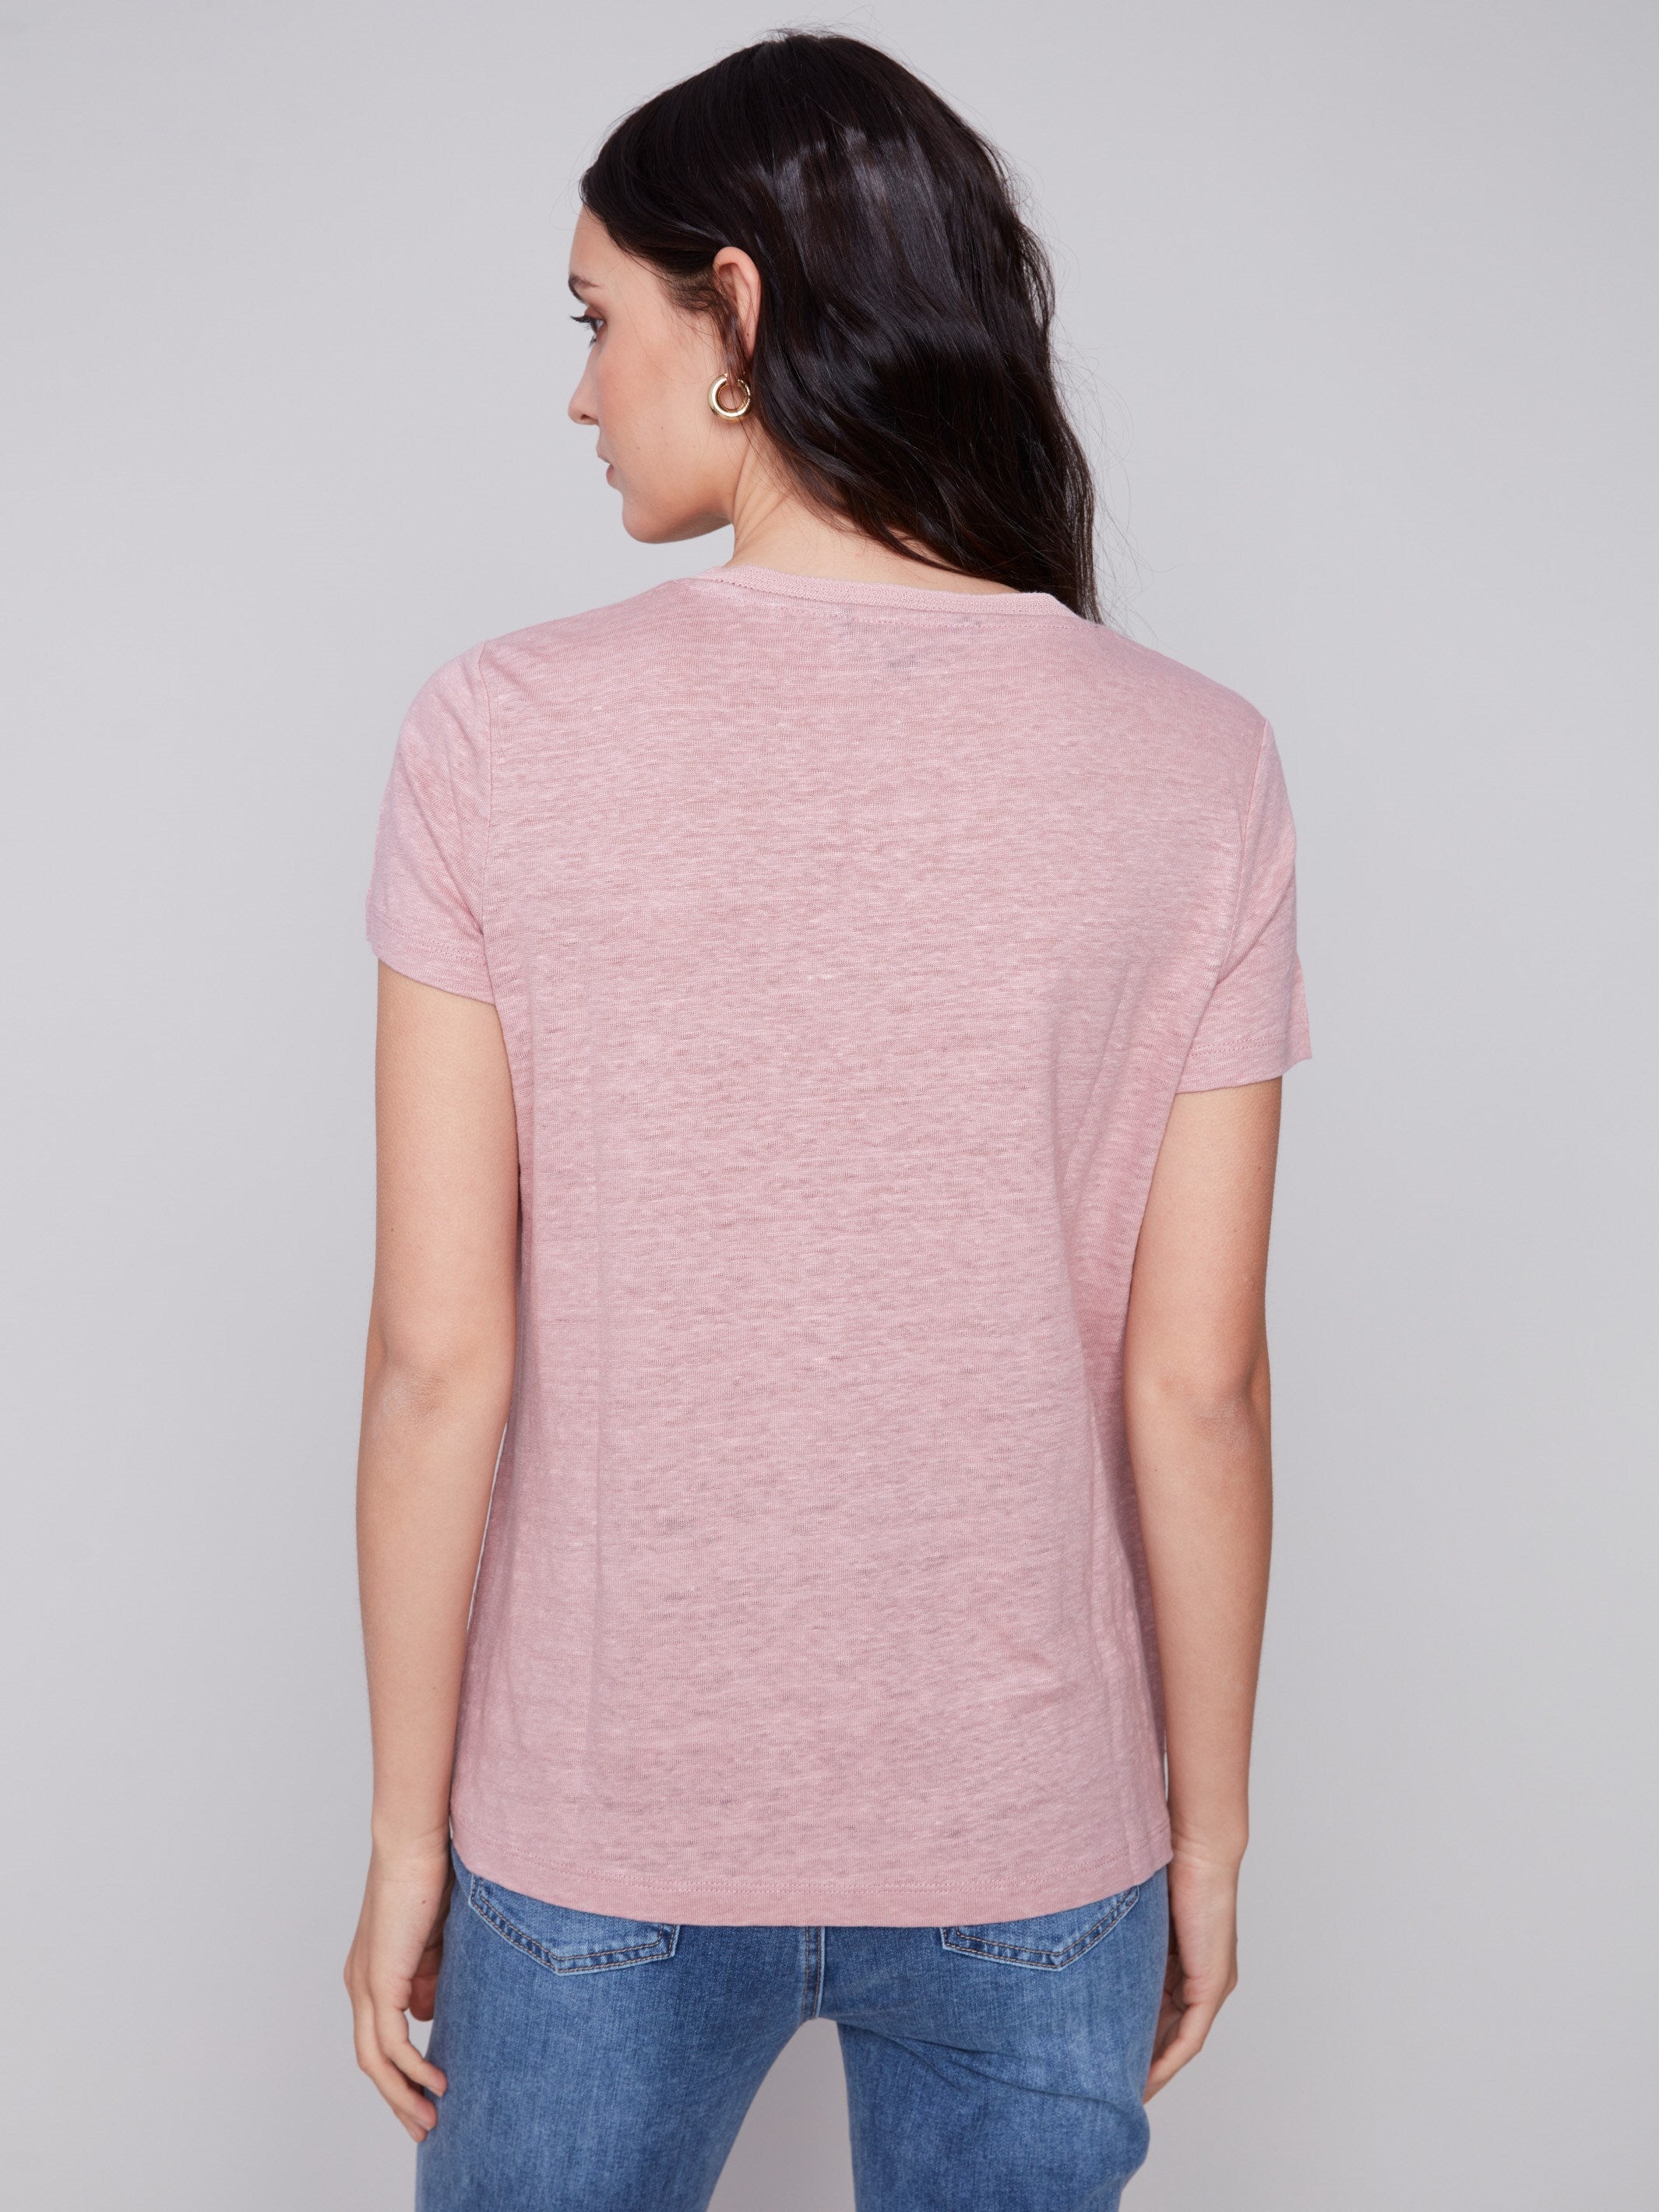 V-Neck Linen T-Shirt - Dusty Rose - Charlie B Collection Canada - Image 2